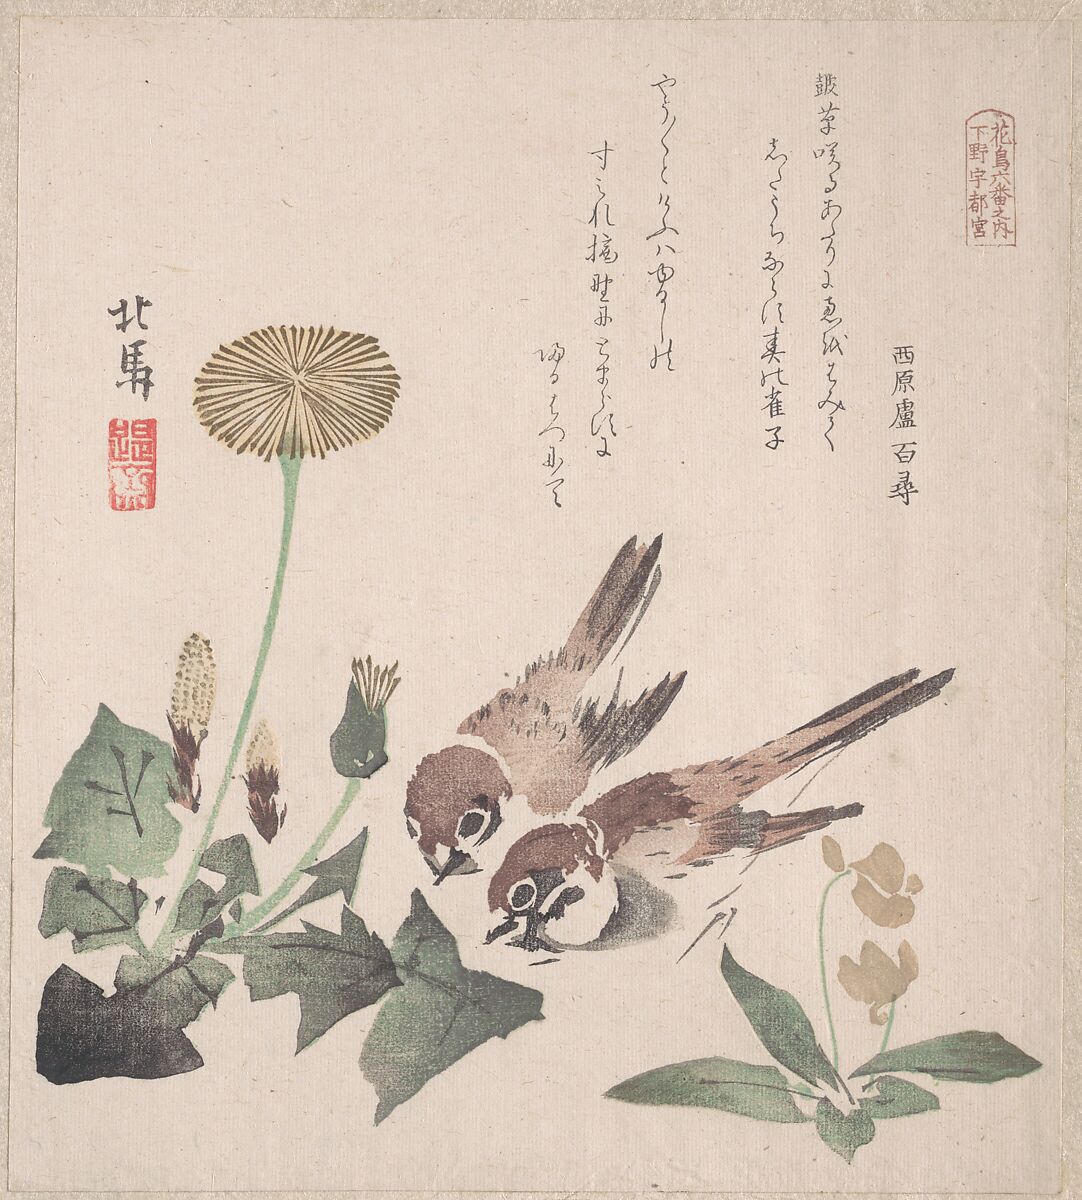 Spring Rain Collection (Harusame shū), vol. 3: Sparrows and Dandelions, Teisai Hokuba (Japanese, 1771–1844), Privately published woodblock prints (surimono) mounted in an album; ink and color on paper, Japan 